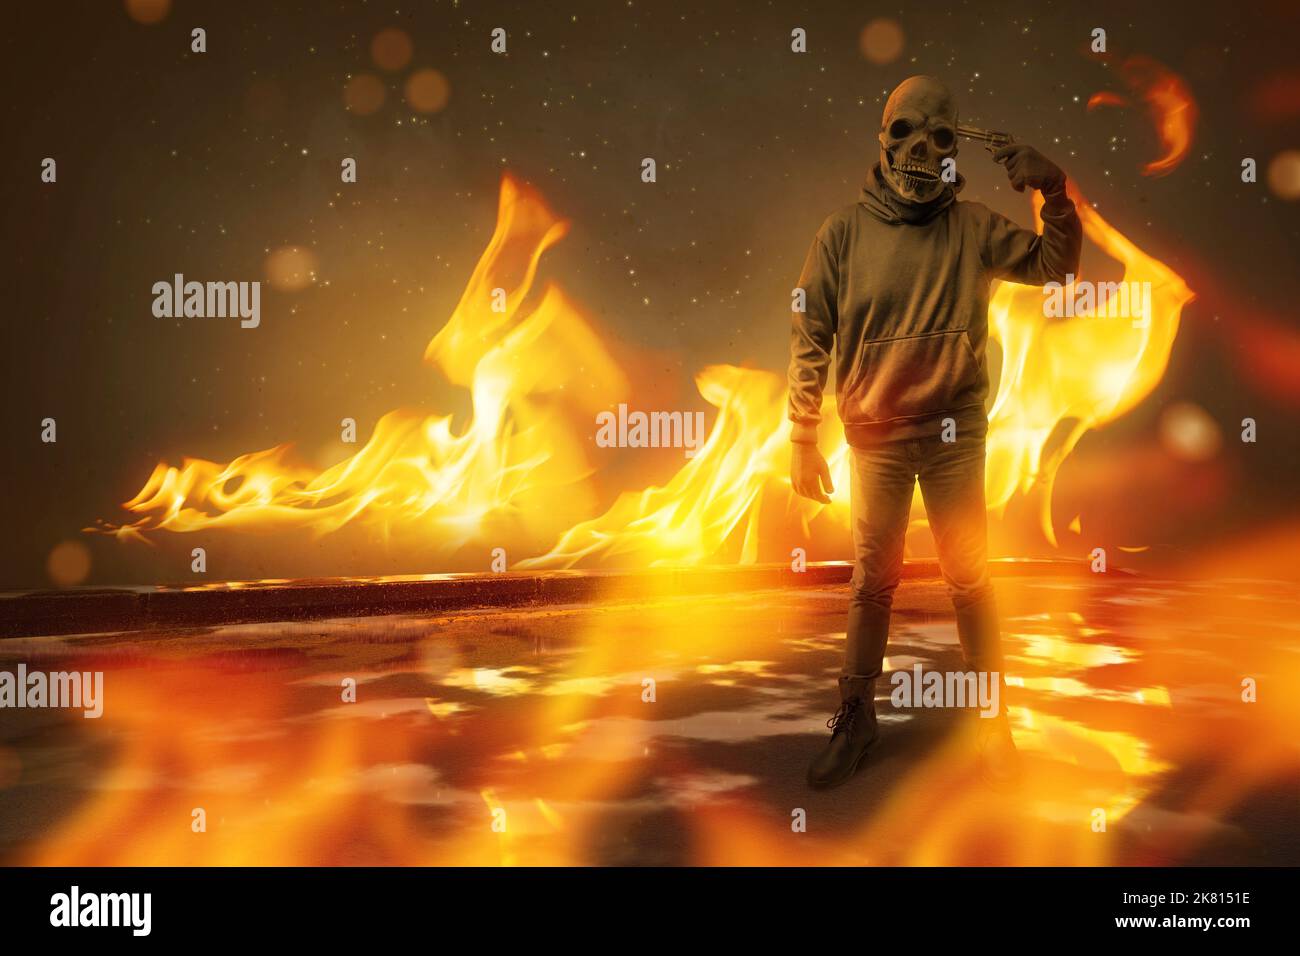 Man with a skull head costume holding gun with a fire background. Halloween concept Stock Photo